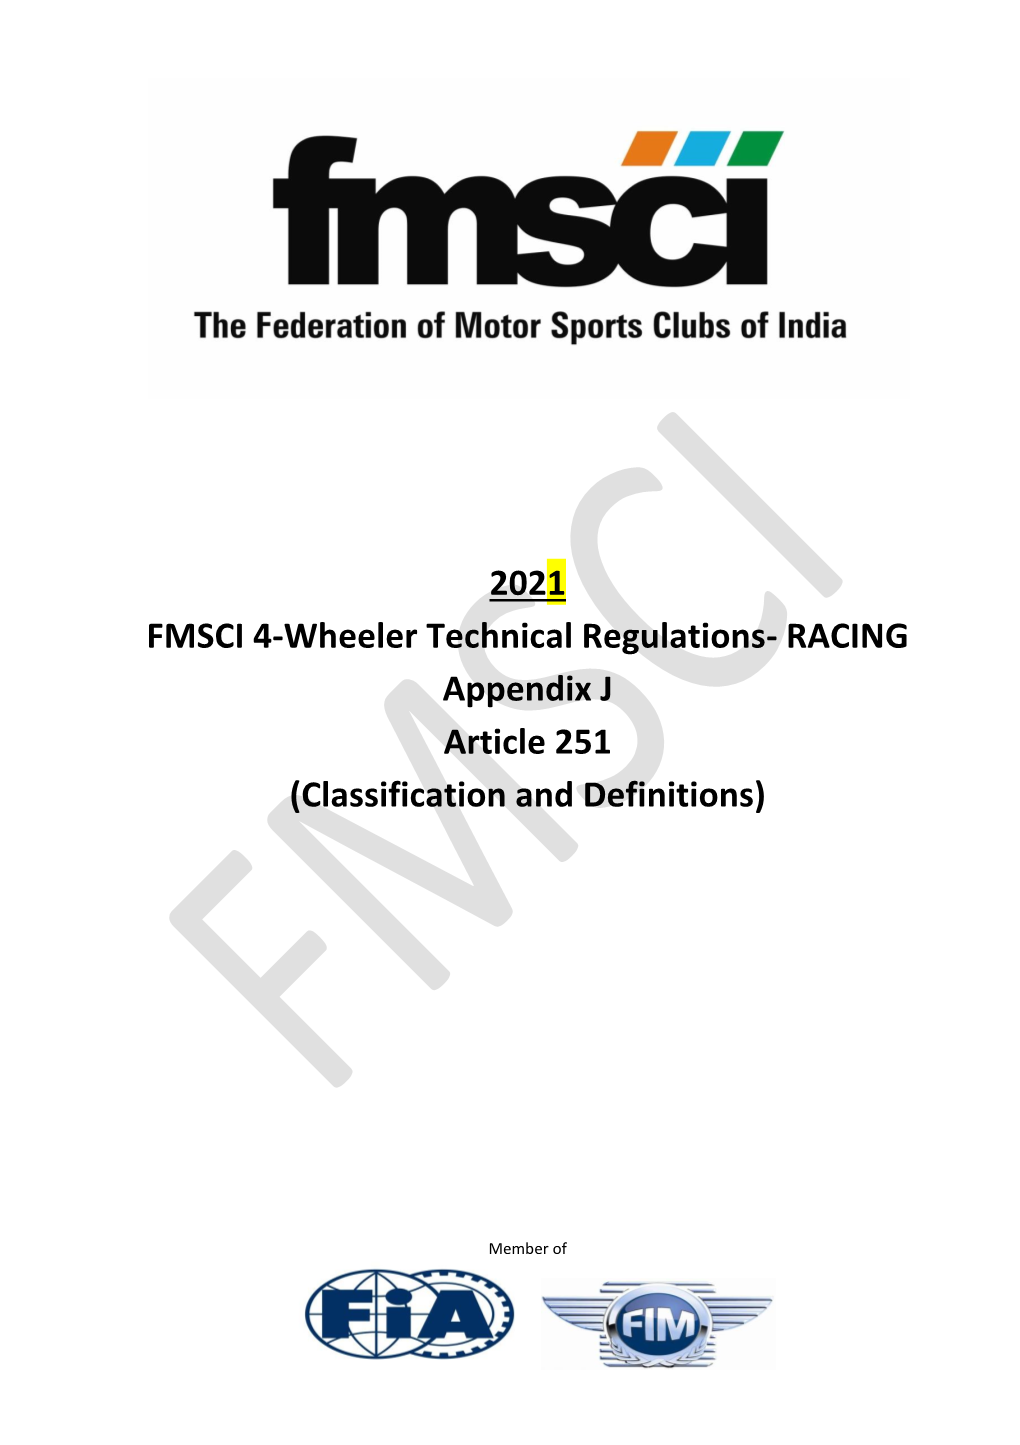 FMSCI Article 251 - Classification and Definitions